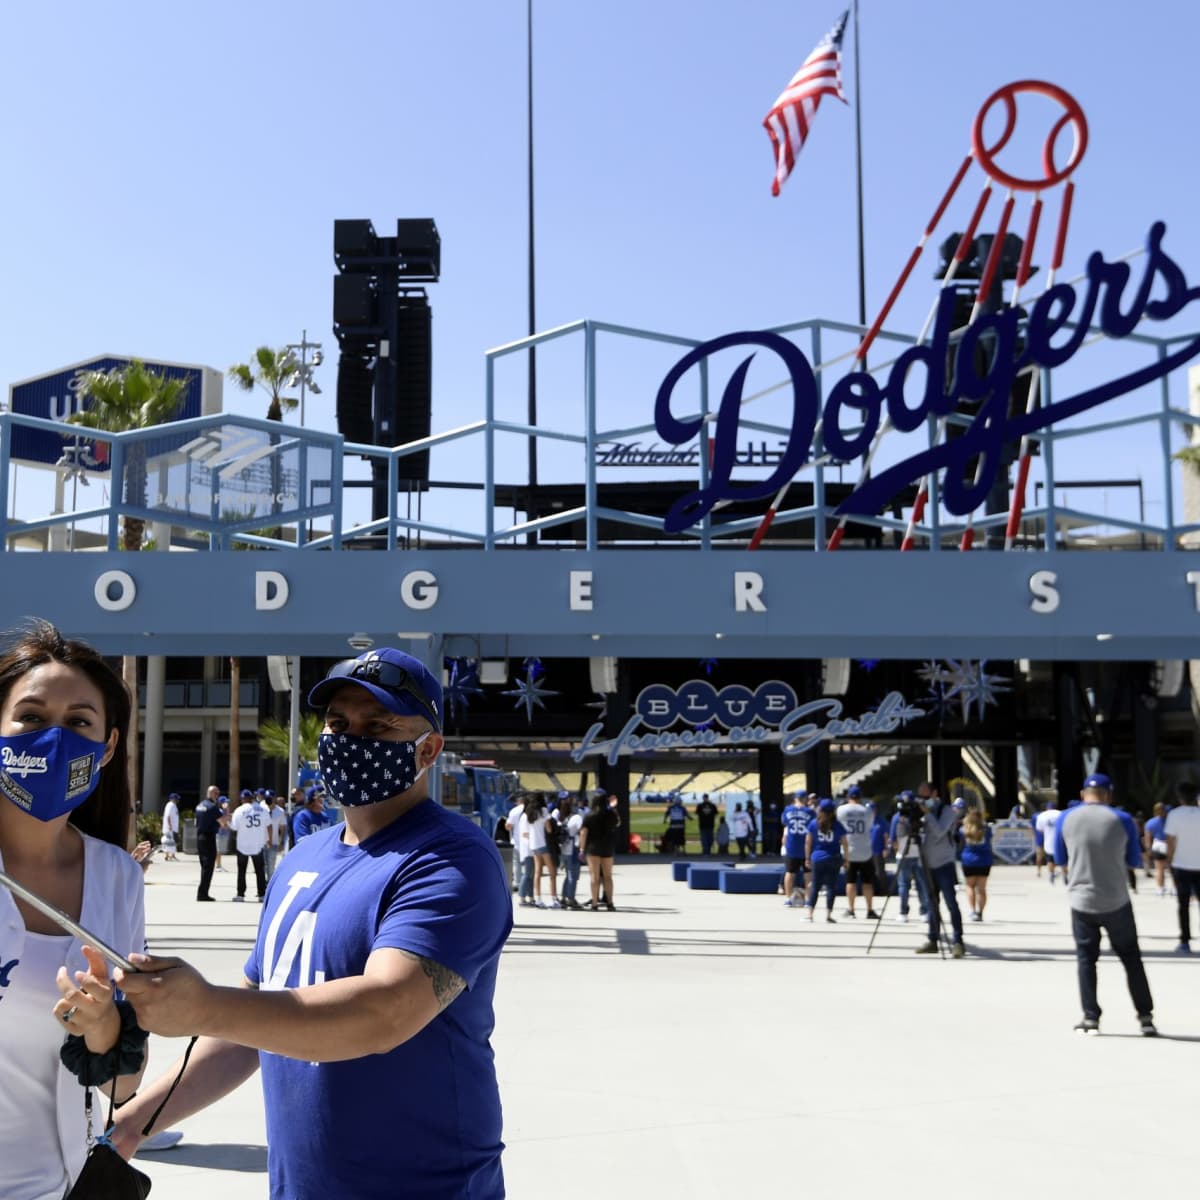 Dodger Stadium Opening Day: The Best Images From The Dodgers Home